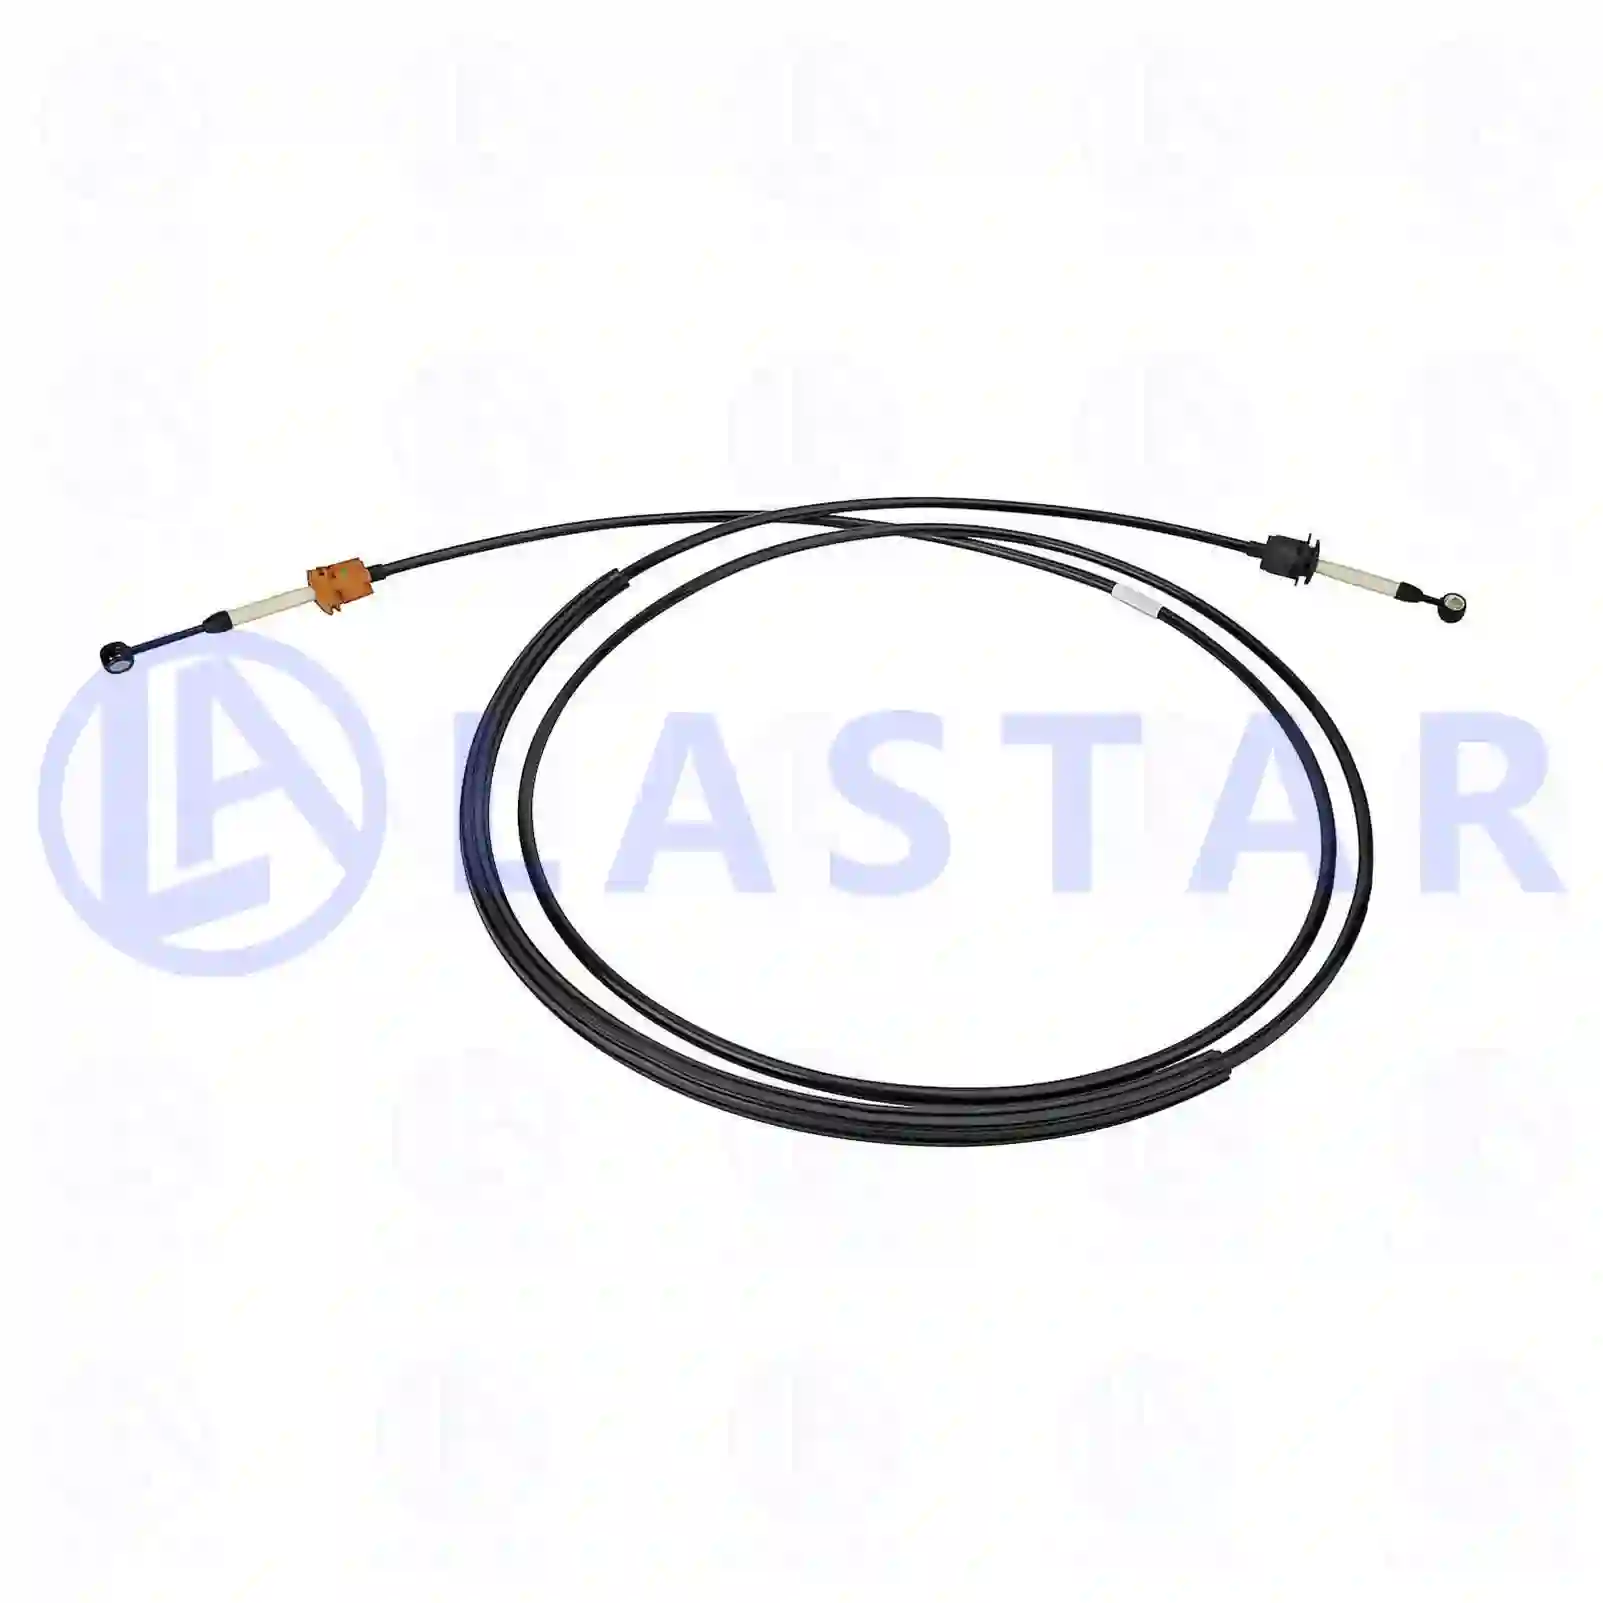 Control cable, switching, 77732686, 20445978, 20700978, 21002878, 21343578, 21789706 ||  77732686 Lastar Spare Part | Truck Spare Parts, Auotomotive Spare Parts Control cable, switching, 77732686, 20445978, 20700978, 21002878, 21343578, 21789706 ||  77732686 Lastar Spare Part | Truck Spare Parts, Auotomotive Spare Parts